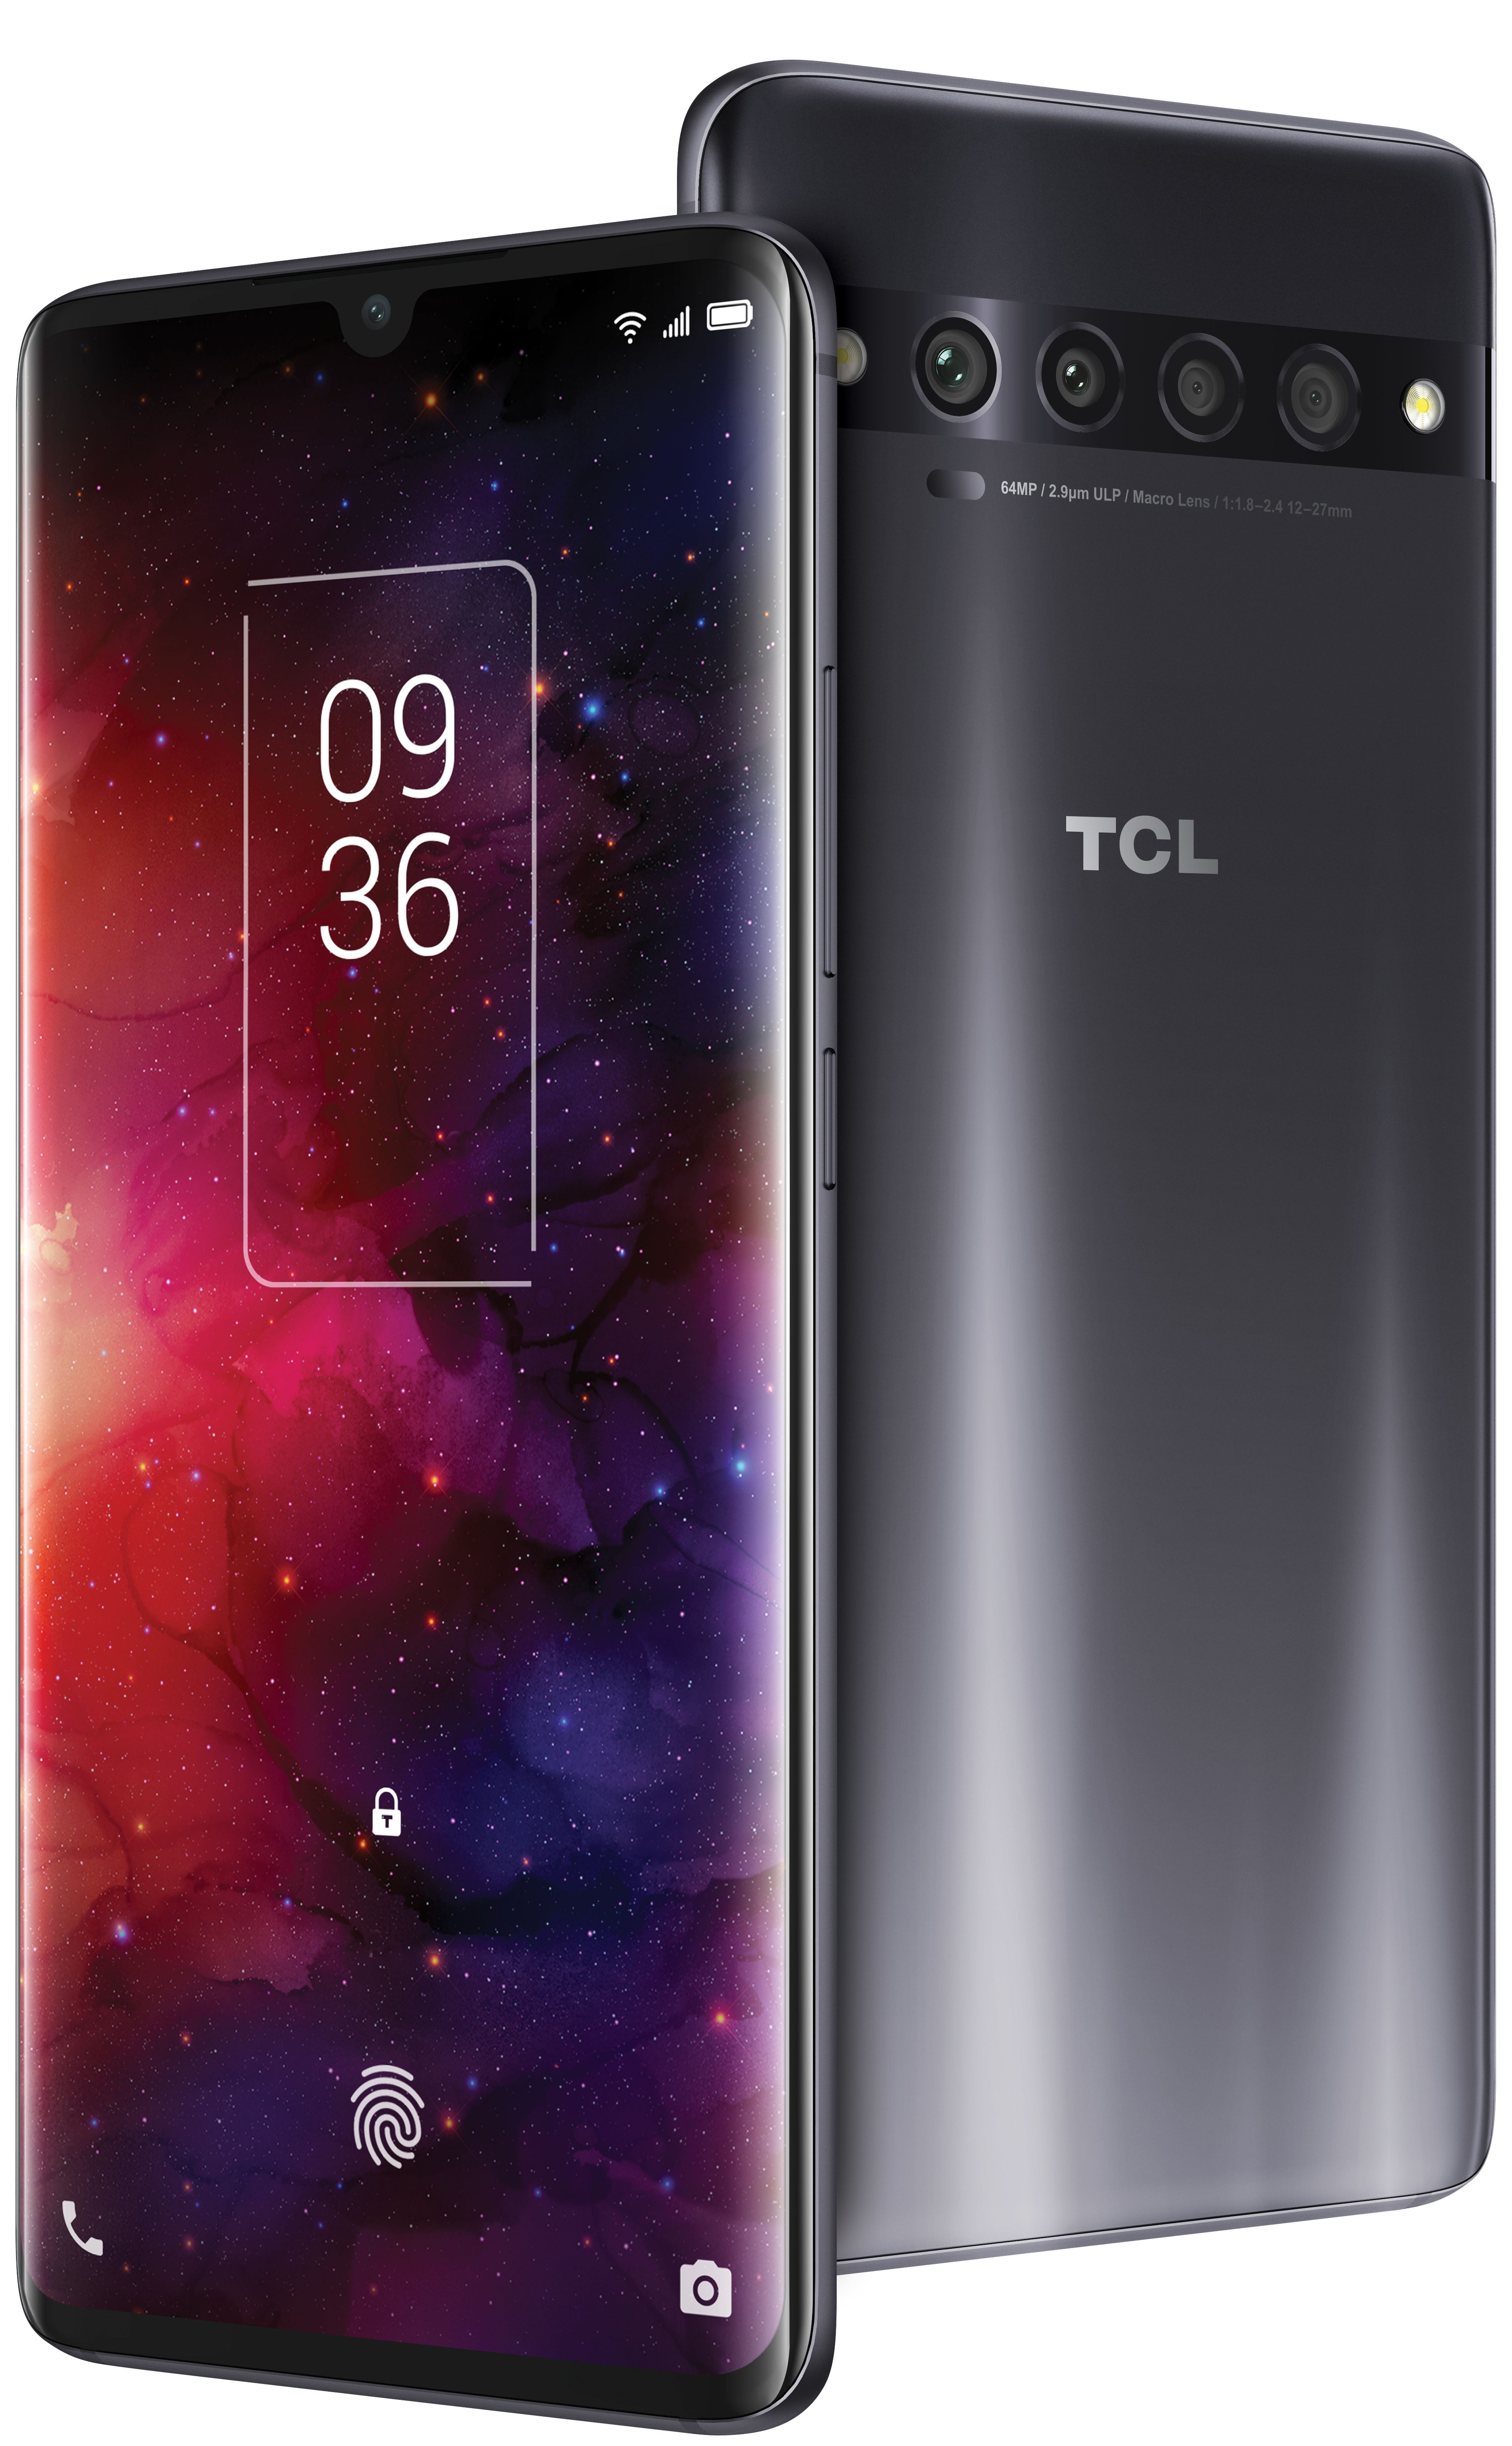 TCL 10 Pro - TCL's new phones are very affordable and are coming to the US very soon